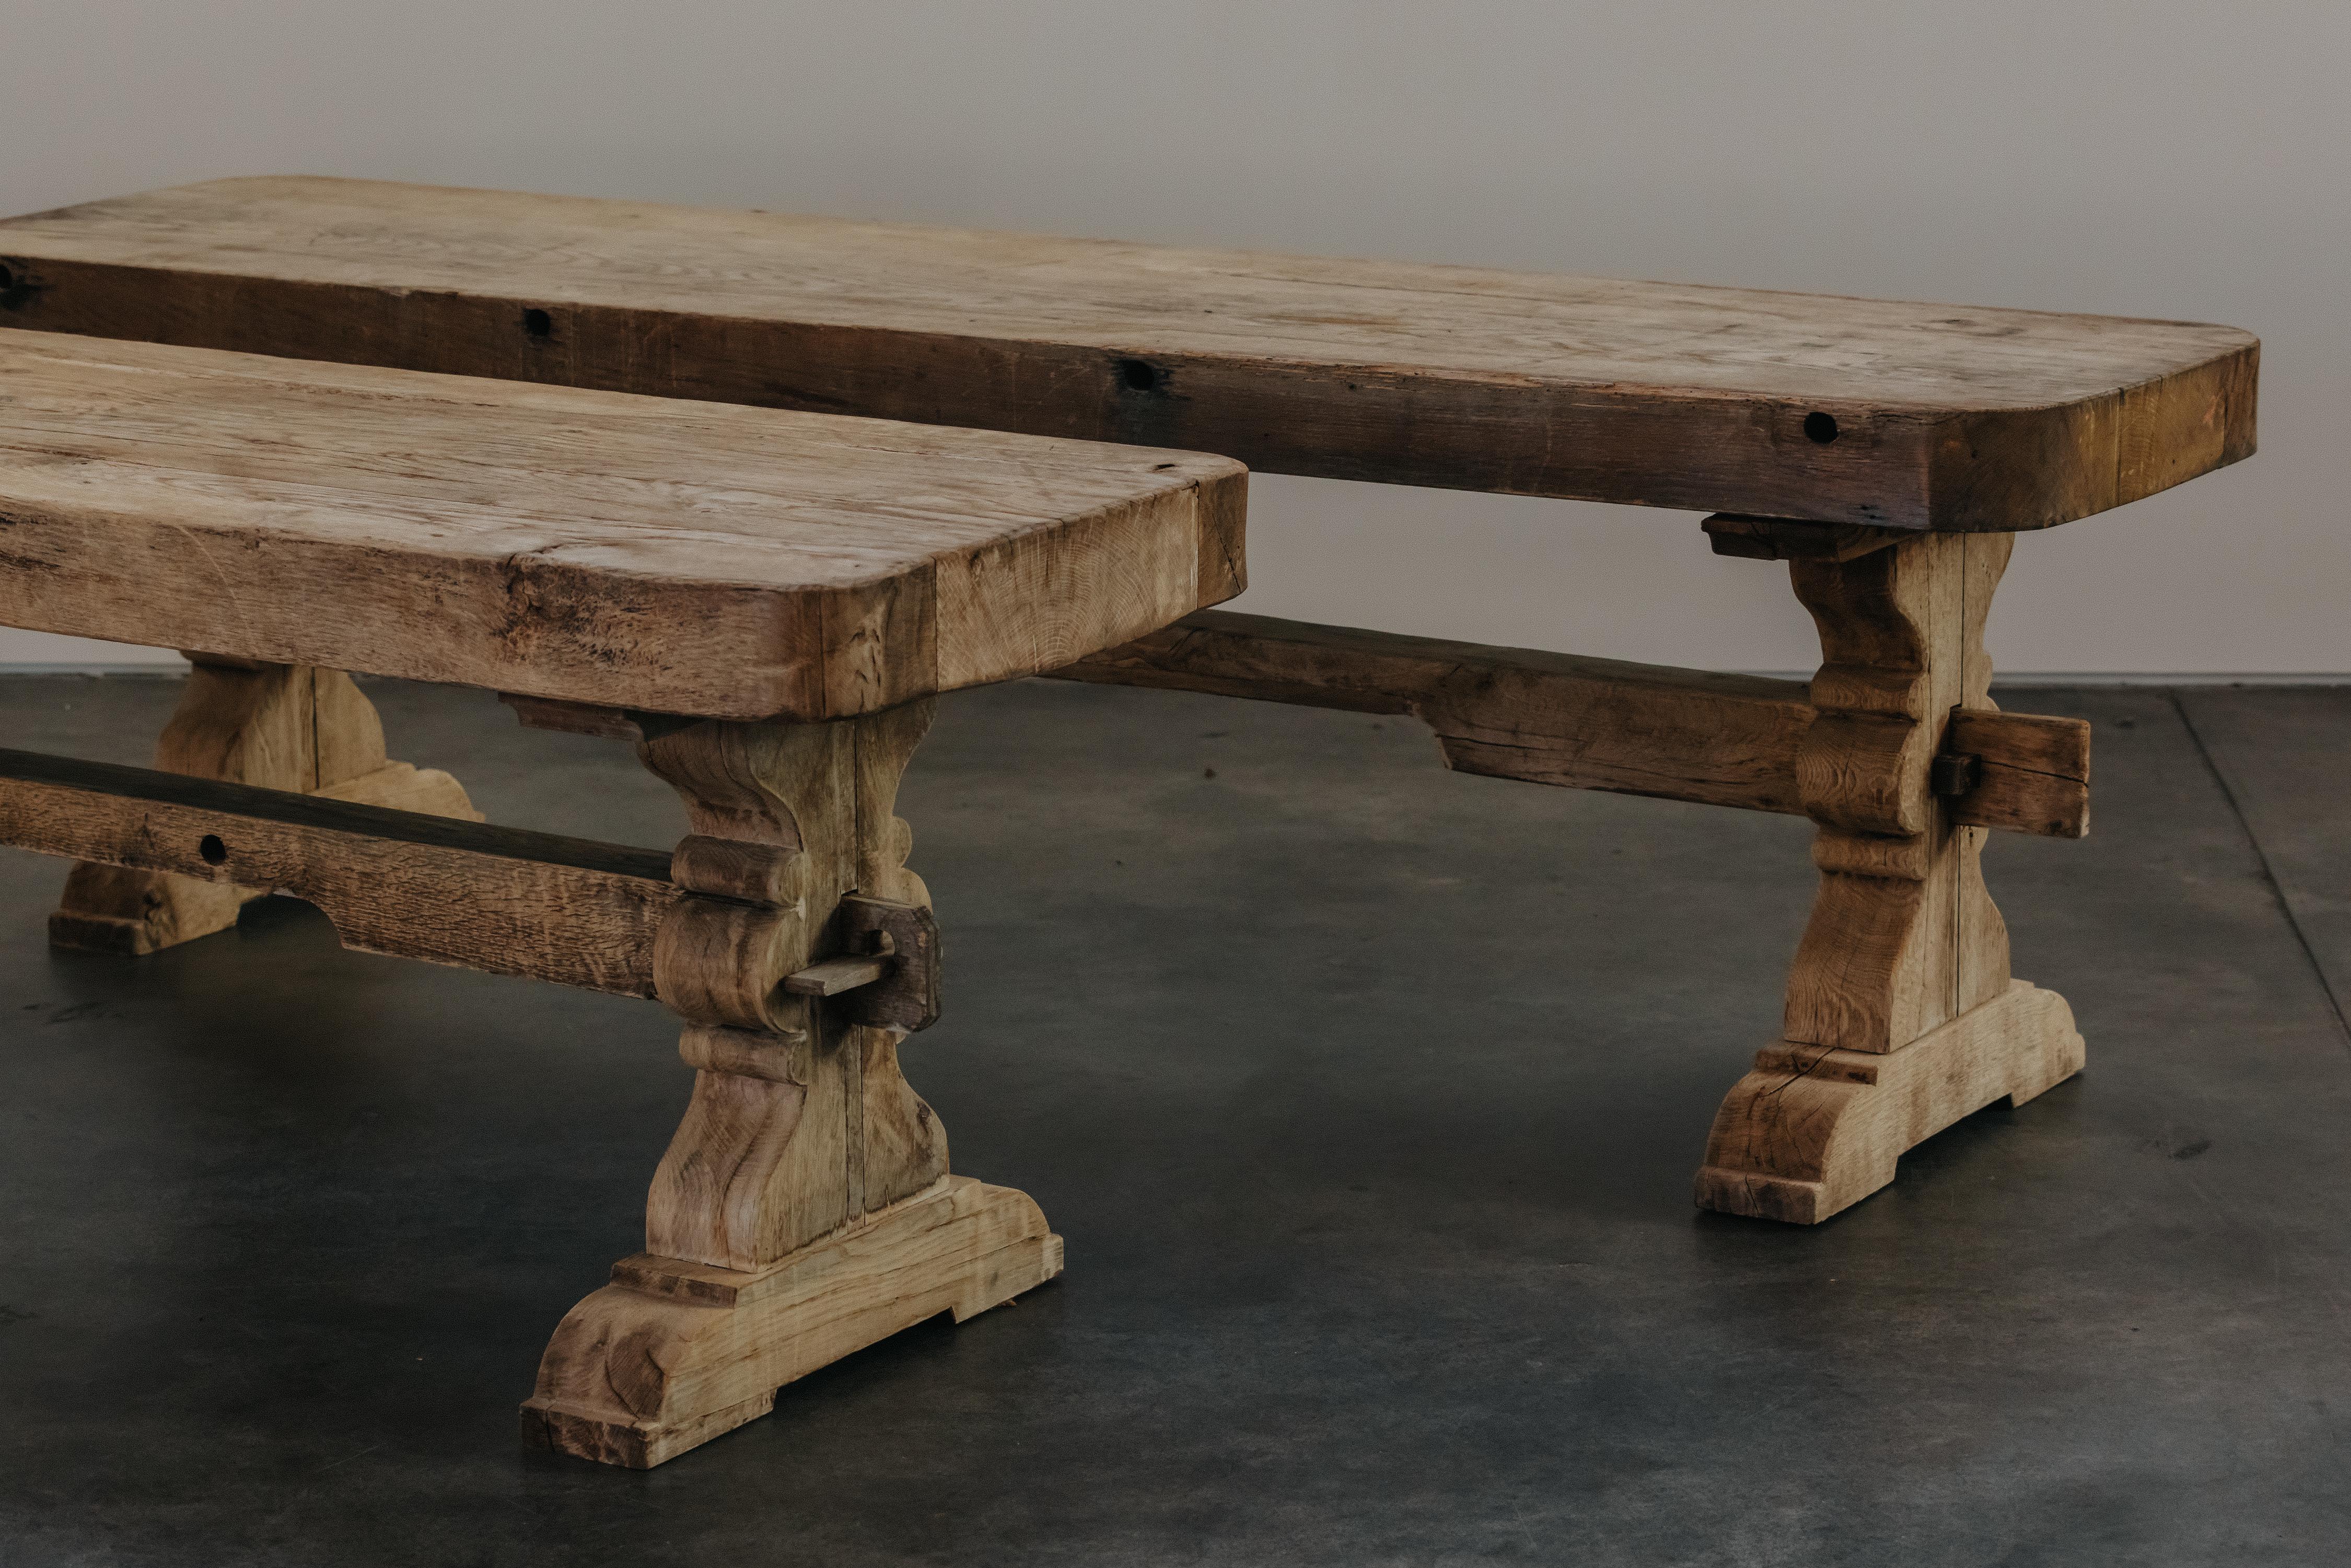 Rare Pair Of Oak Wine Tasting Tables From France, Circa 1880.  Heavy, solid oak construction with superb patina and use. 